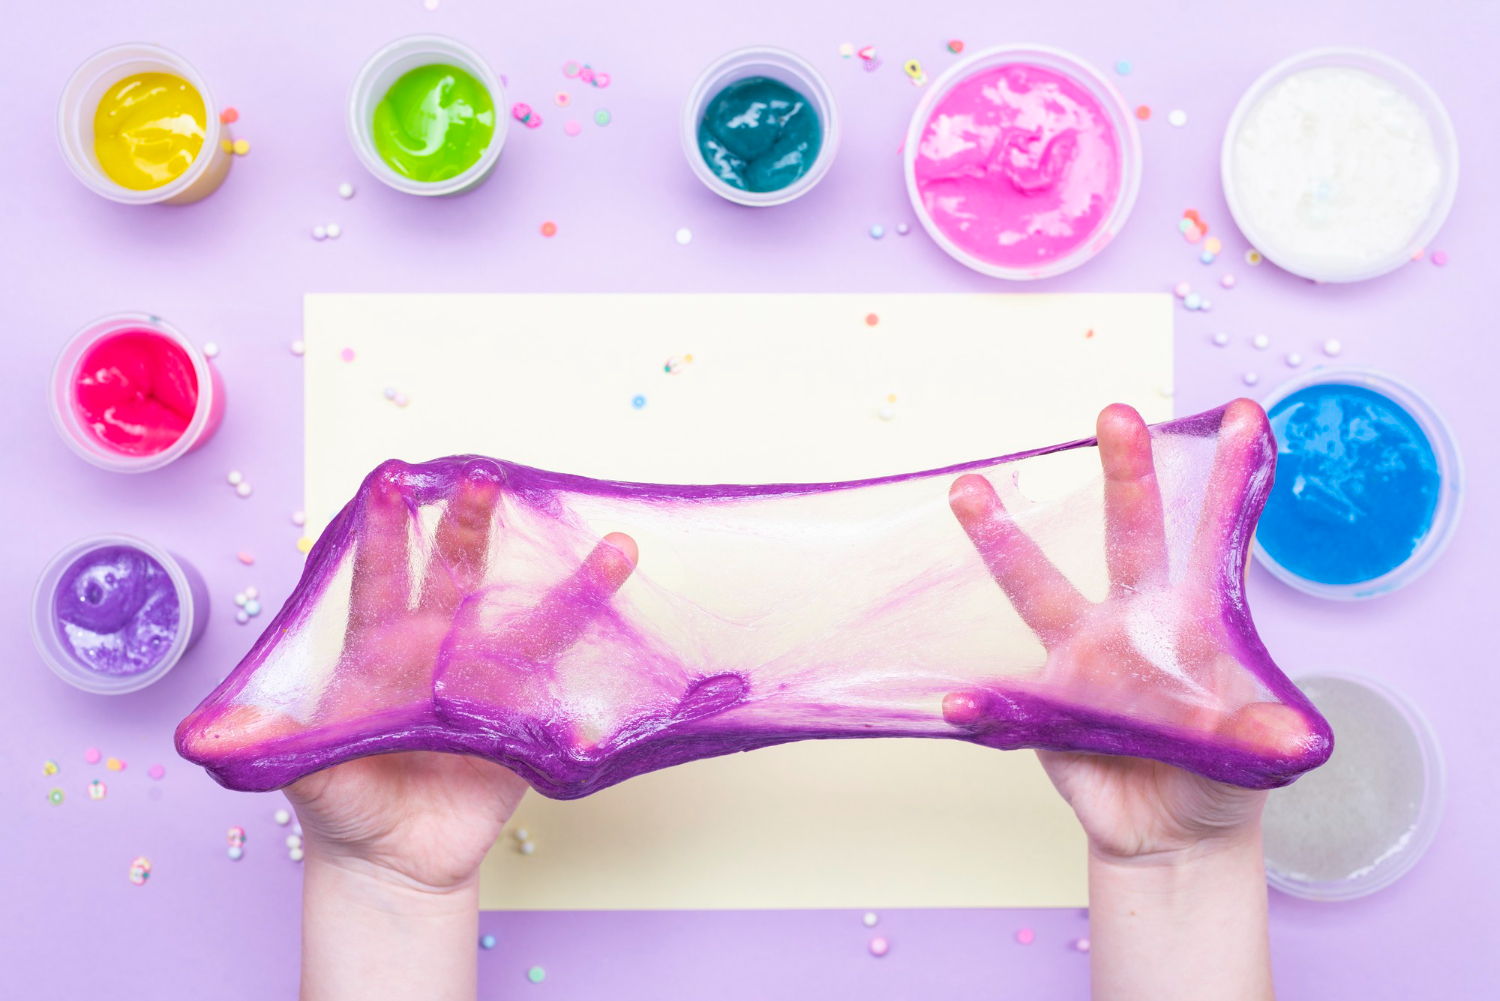 How to Make Slime at Home: Slime Recipe With & Without Borax